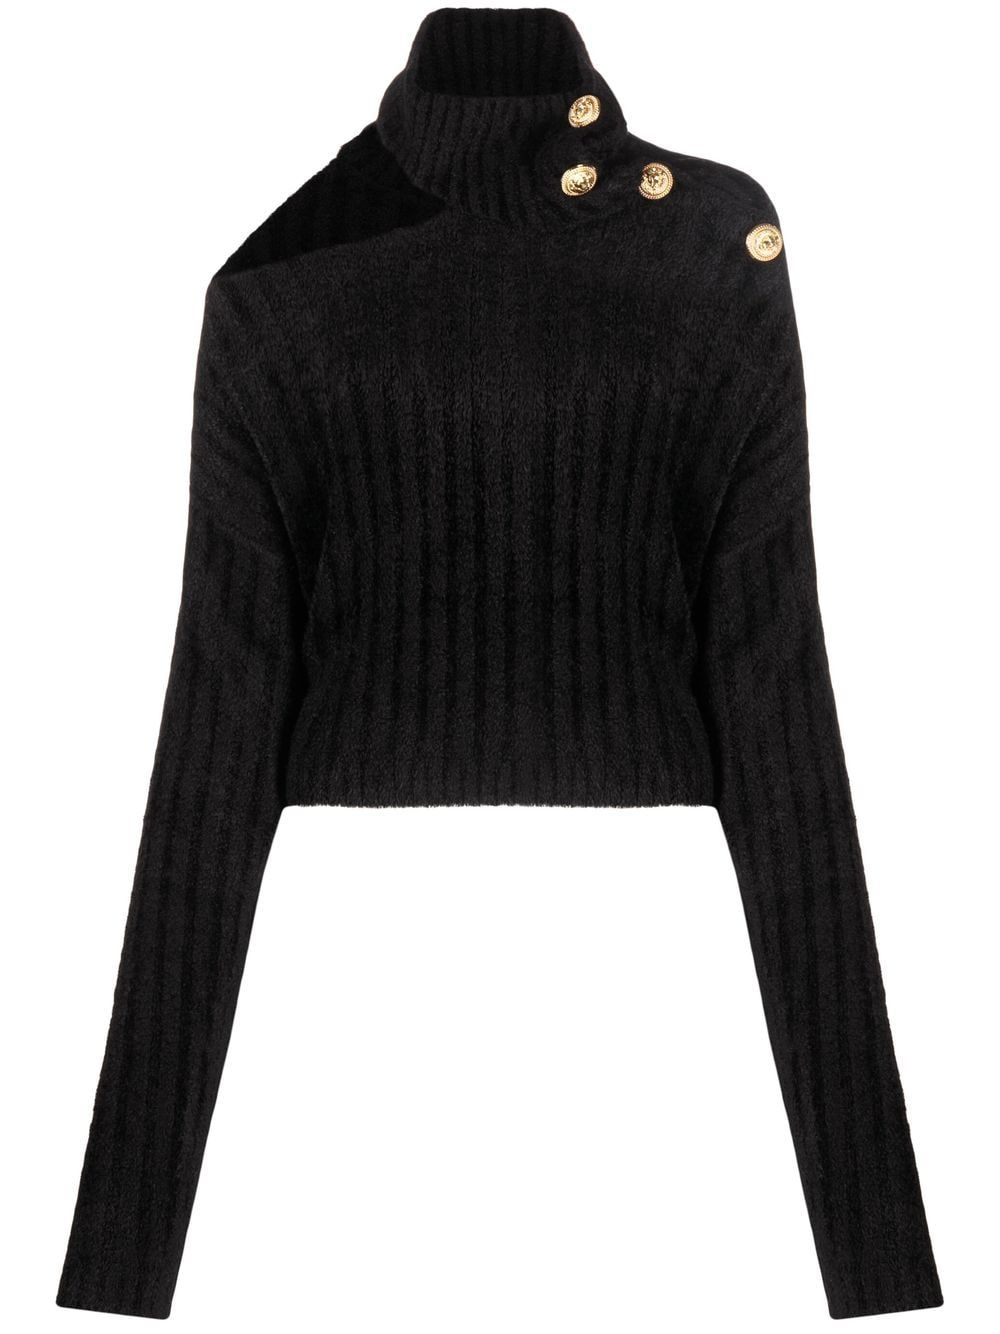 Image 1 of Balmain cut-out cropped jumper